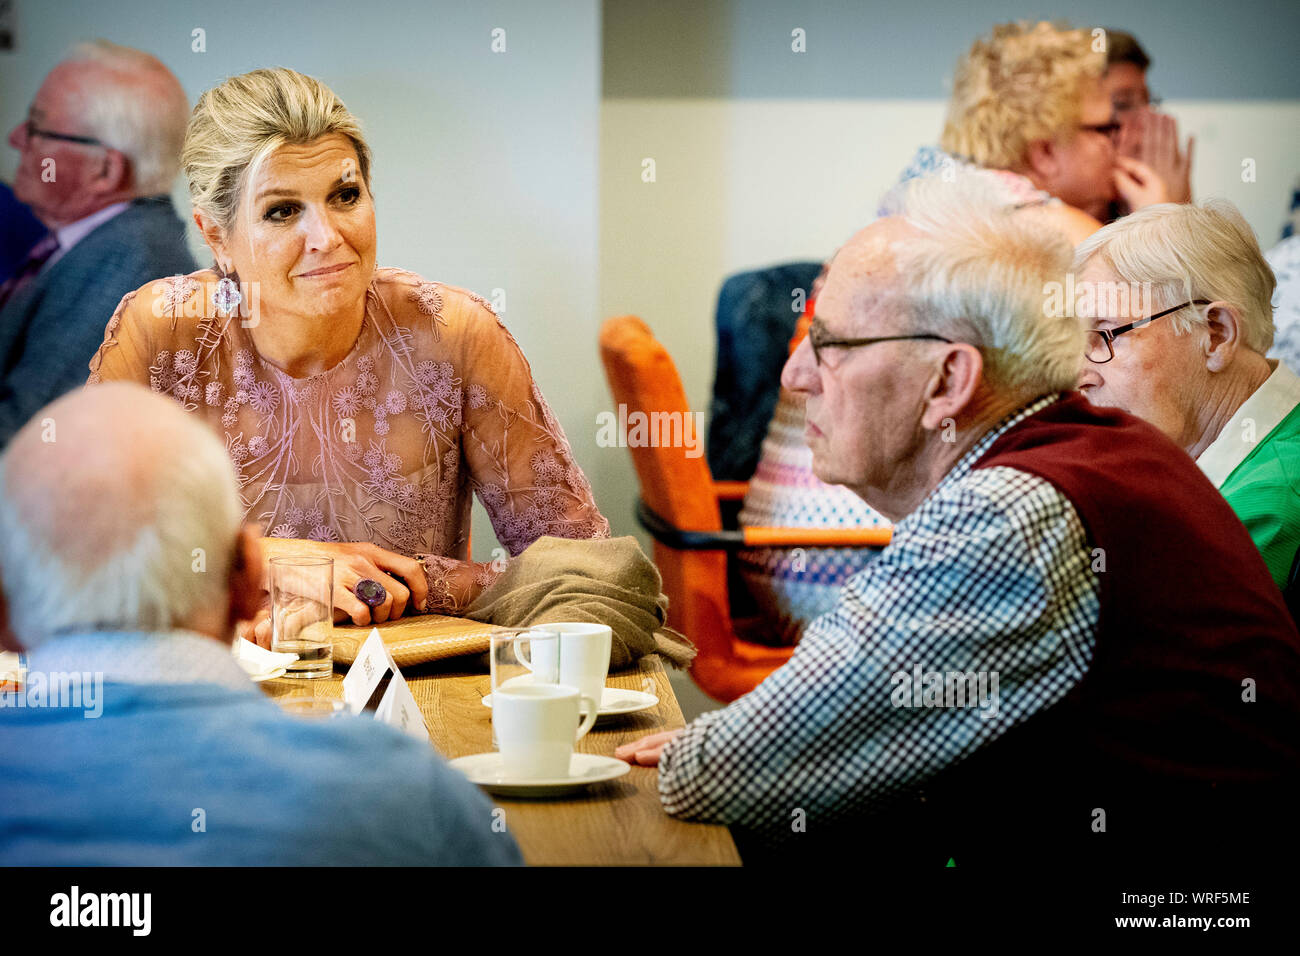 Giessenburg, The Netherlands. 10th Sep, 2019. Queen Maxima of The Netherlands attends the 35th anniversary of Alzheimer Netherlands in Trefpunt de Til in Giessenburg, The Netherlands, 10 September 2019. Credit: Patrick van Katwijk/ POINT DE VUE OUT |/dpa/Alamy Live News Stock Photo